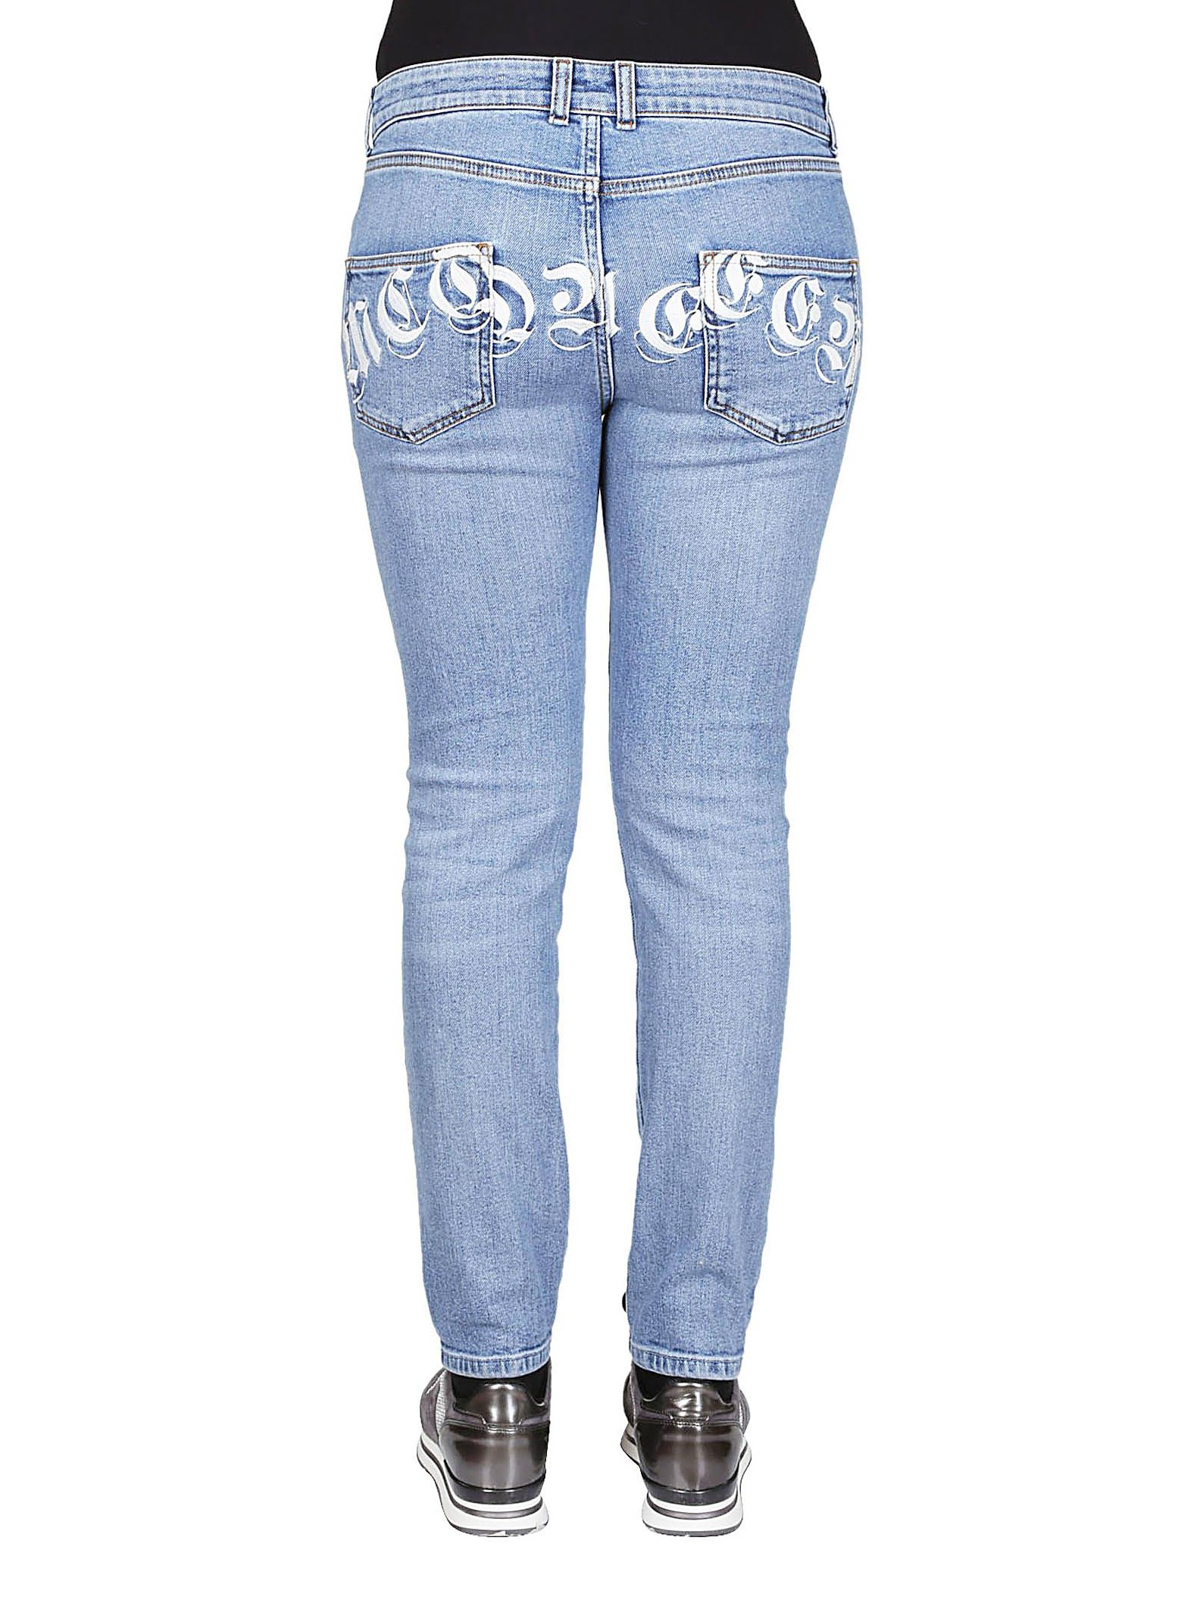 Skinny jeans Alexander Mcqueen - Gothic logo print cropped jeans 